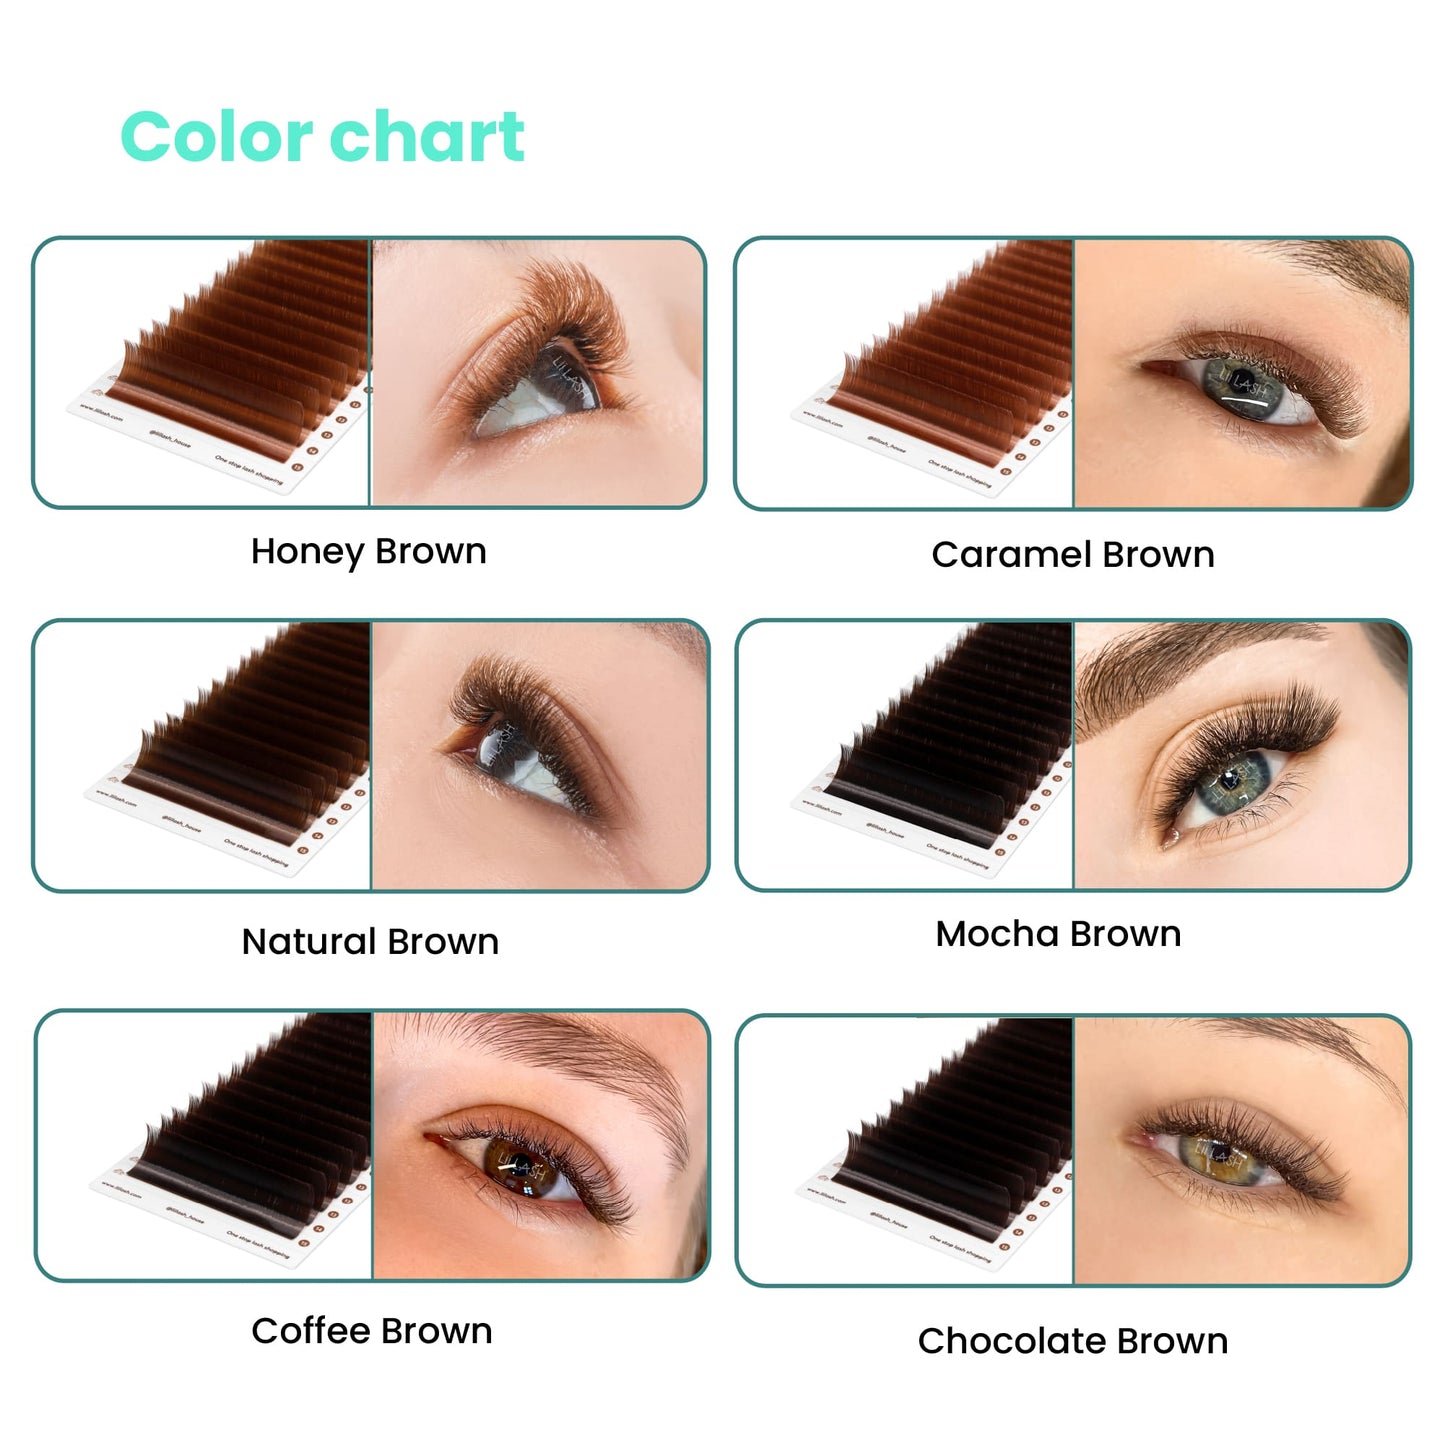 Close-up of eyes displaying the outcome of 6 brown shades: honey, caramel, natural, mocha, coffee, and chocolate